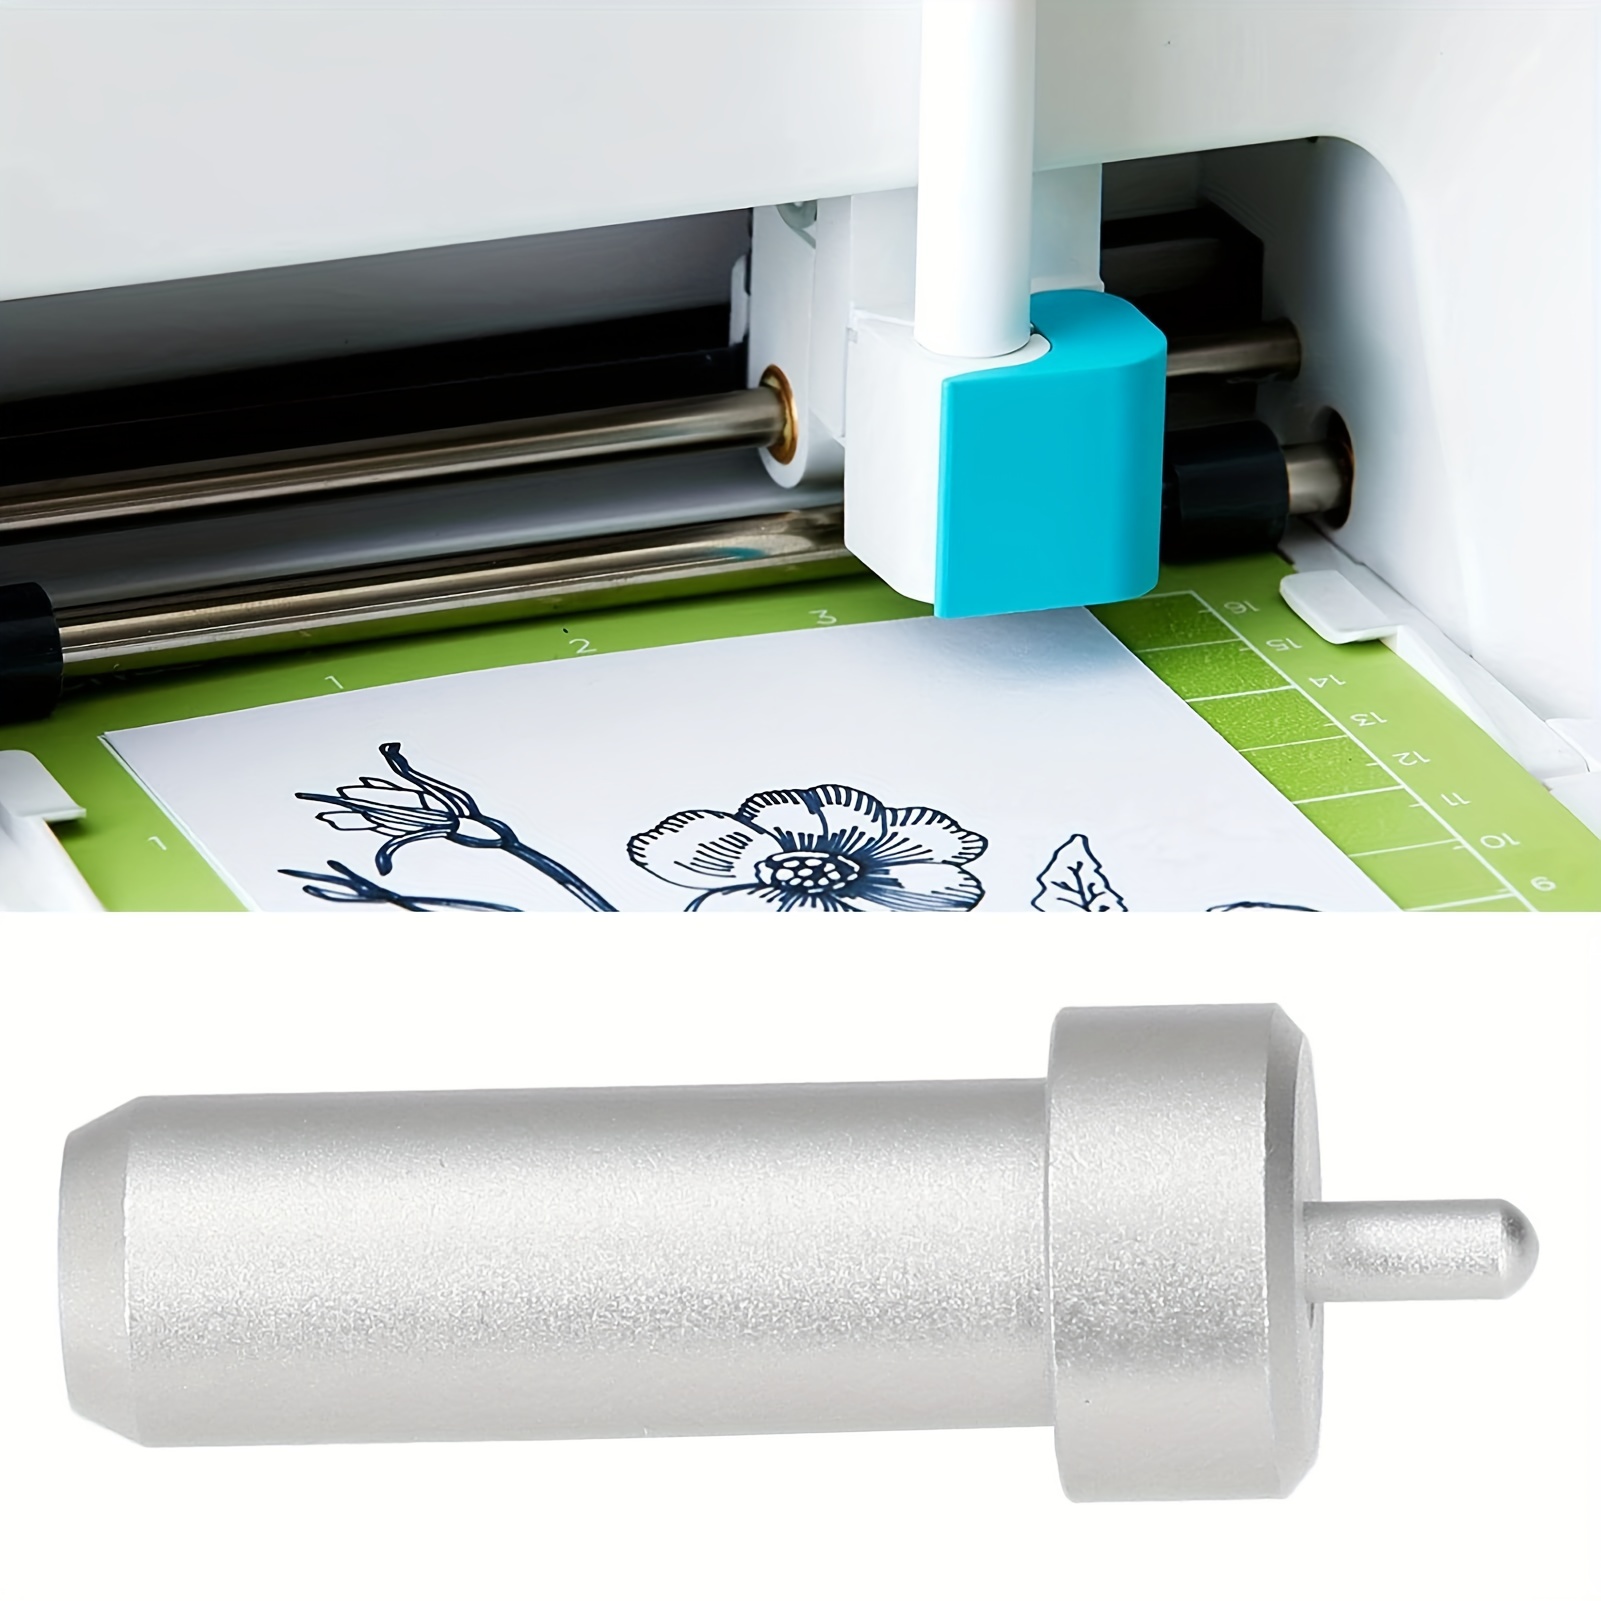 Explore Deep Cut Blade with Hosing for Cricut Maker, Explore Fabric  Blade,Fabric Bonded Blade and Housing Compatible with The Explore One,  Explore